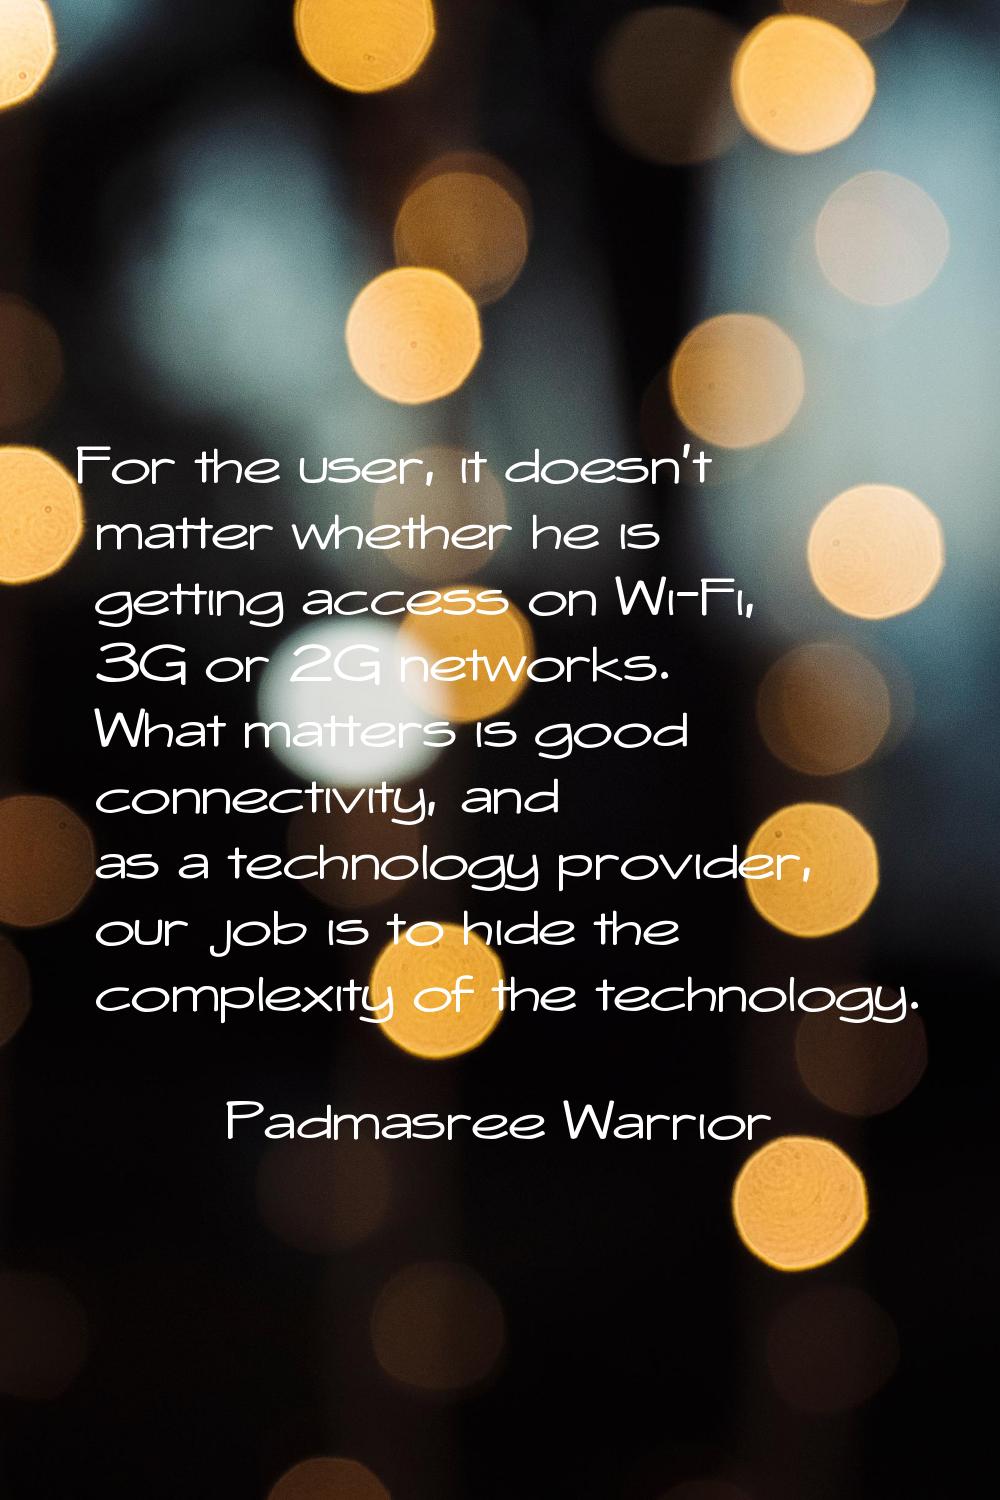 For the user, it doesn't matter whether he is getting access on Wi-Fi, 3G or 2G networks. What matt